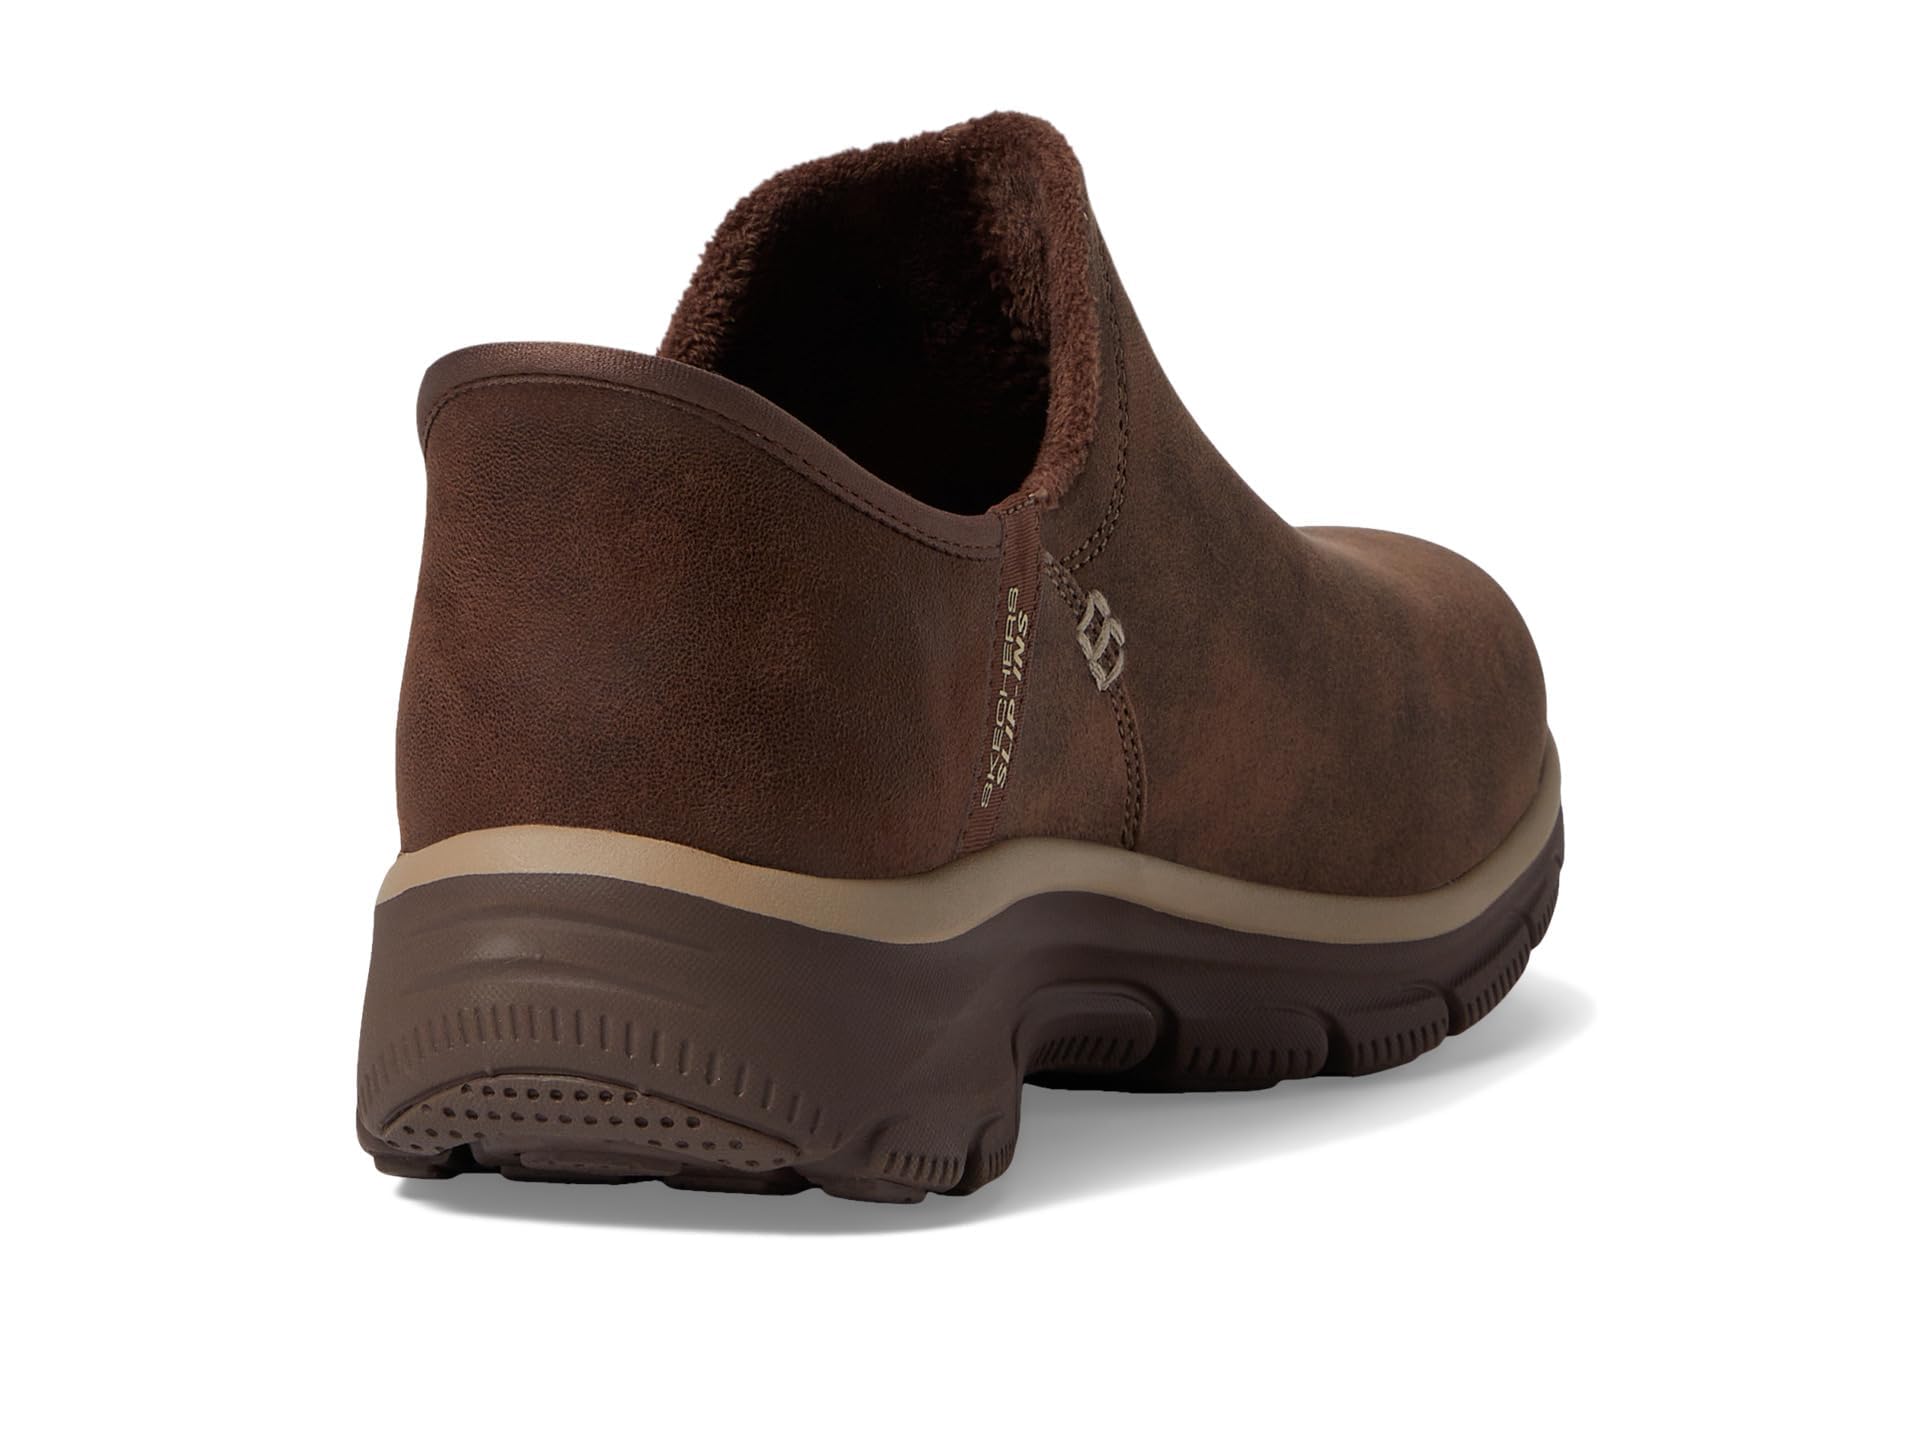 Skechers Women's Easy Going-Modern Hour-Hands Free Slip-Ins Ankle Boot, Chocolate, 8.5